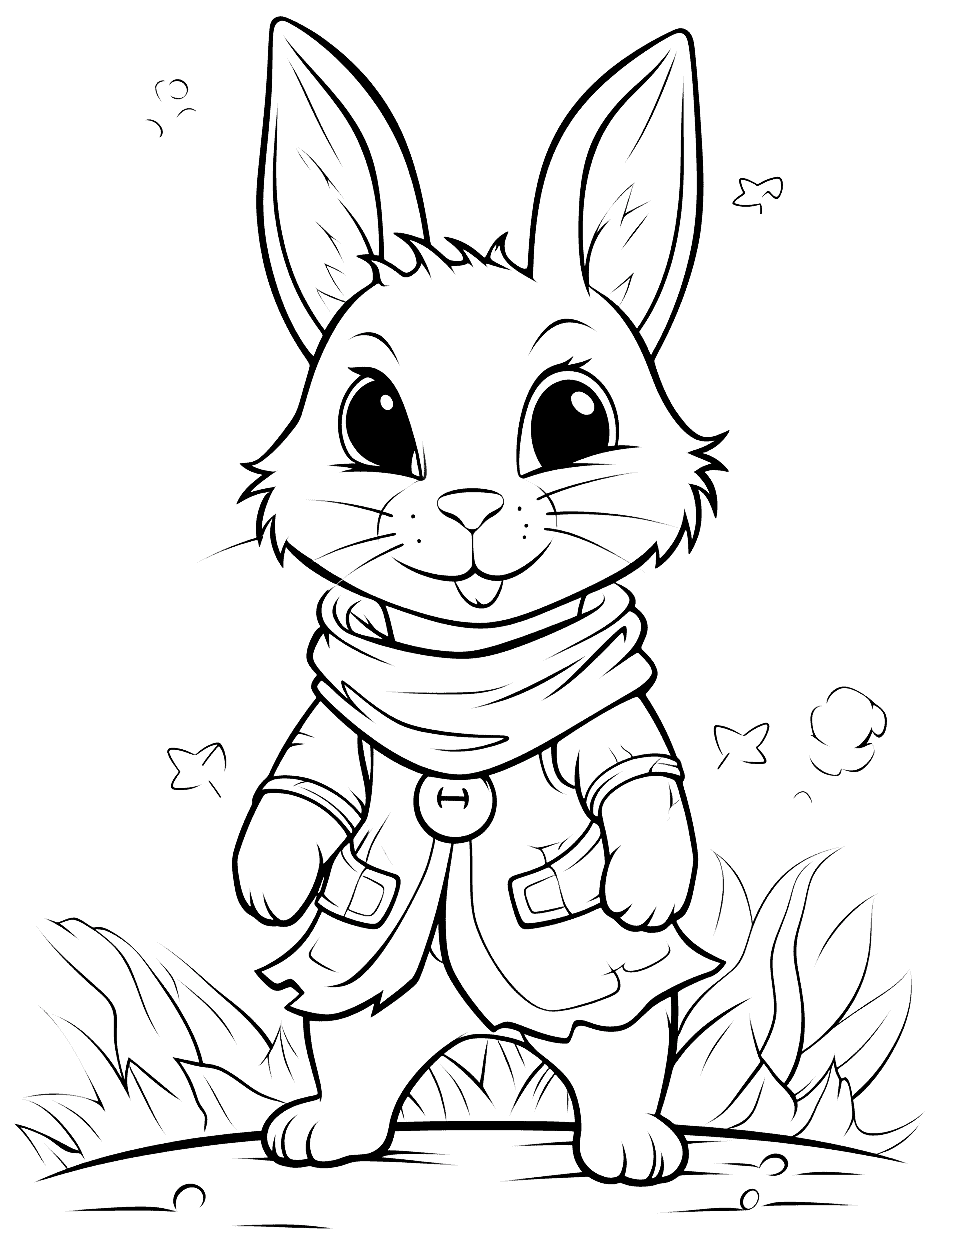 Rabbit bunny coloring pages free printables